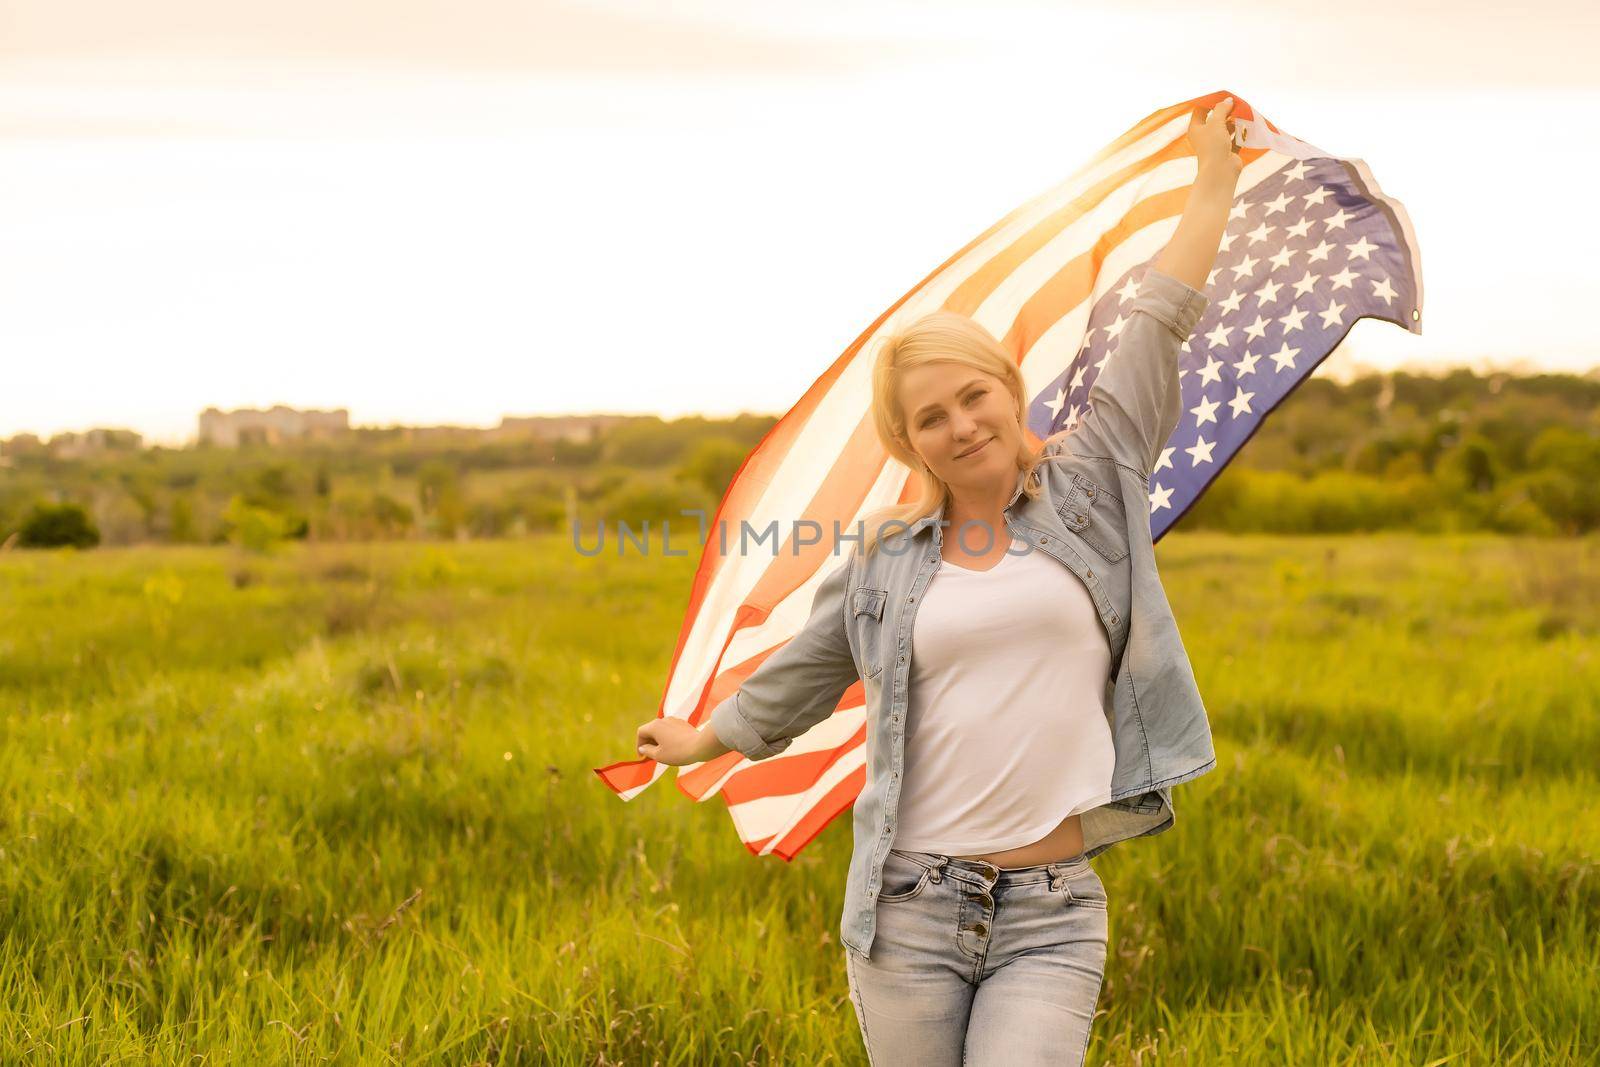 attractive woman holding an American flag in the wind in a field. Summer landscape against the blue sky. Horizontal orientation